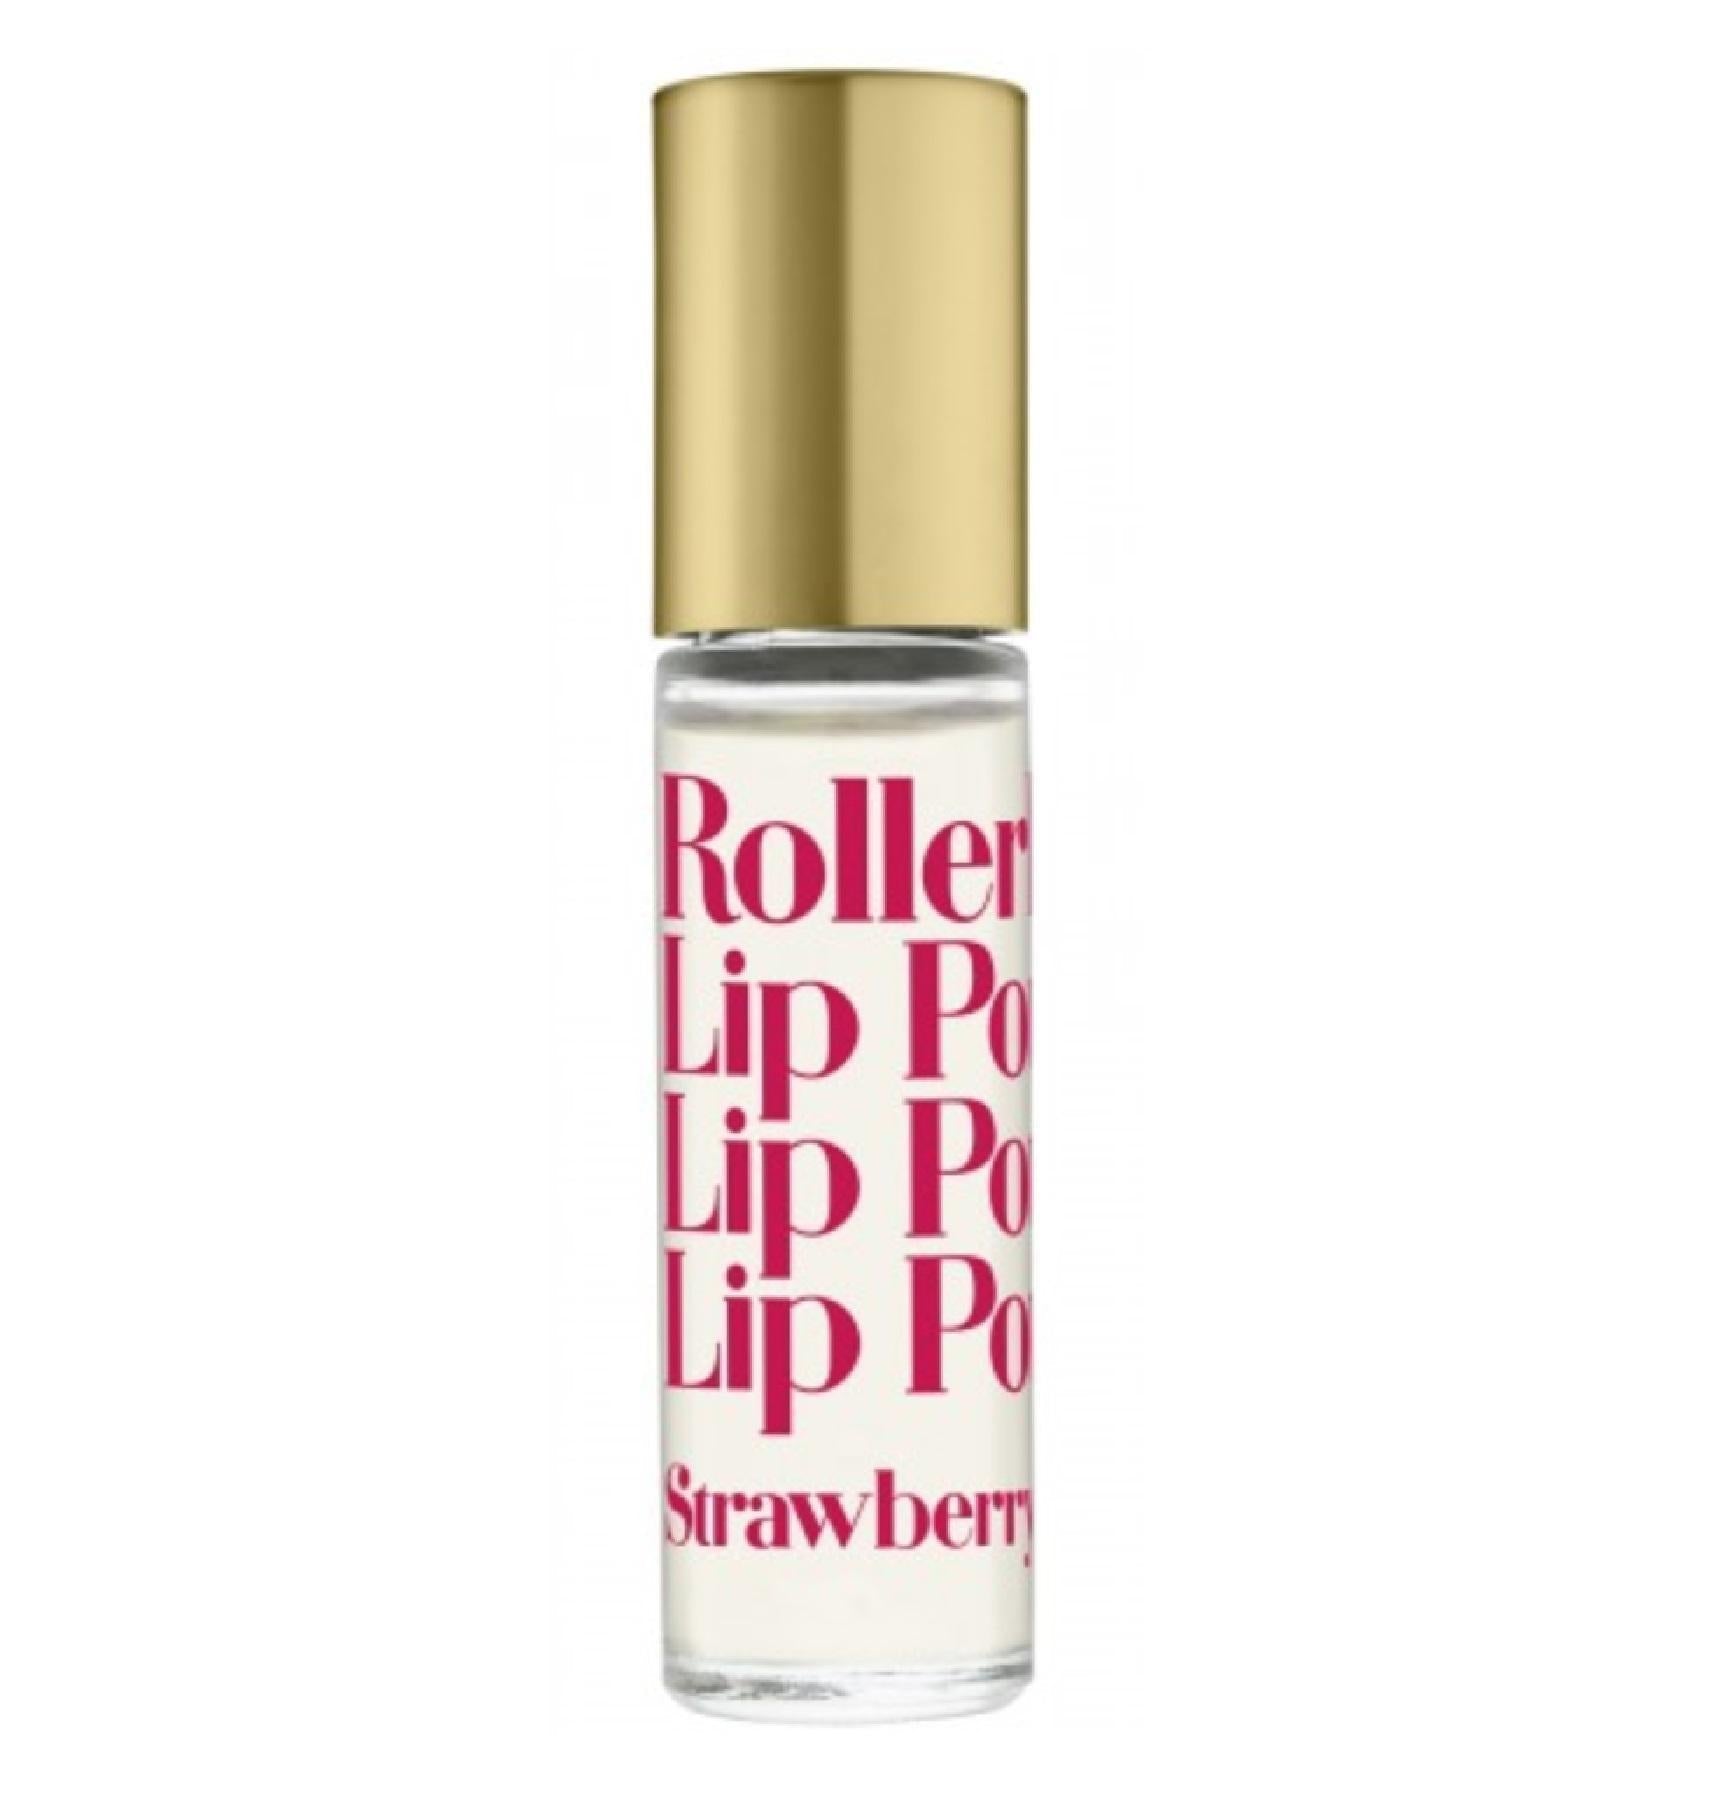 Flavored Rollerball Lip Potion | Strawberry